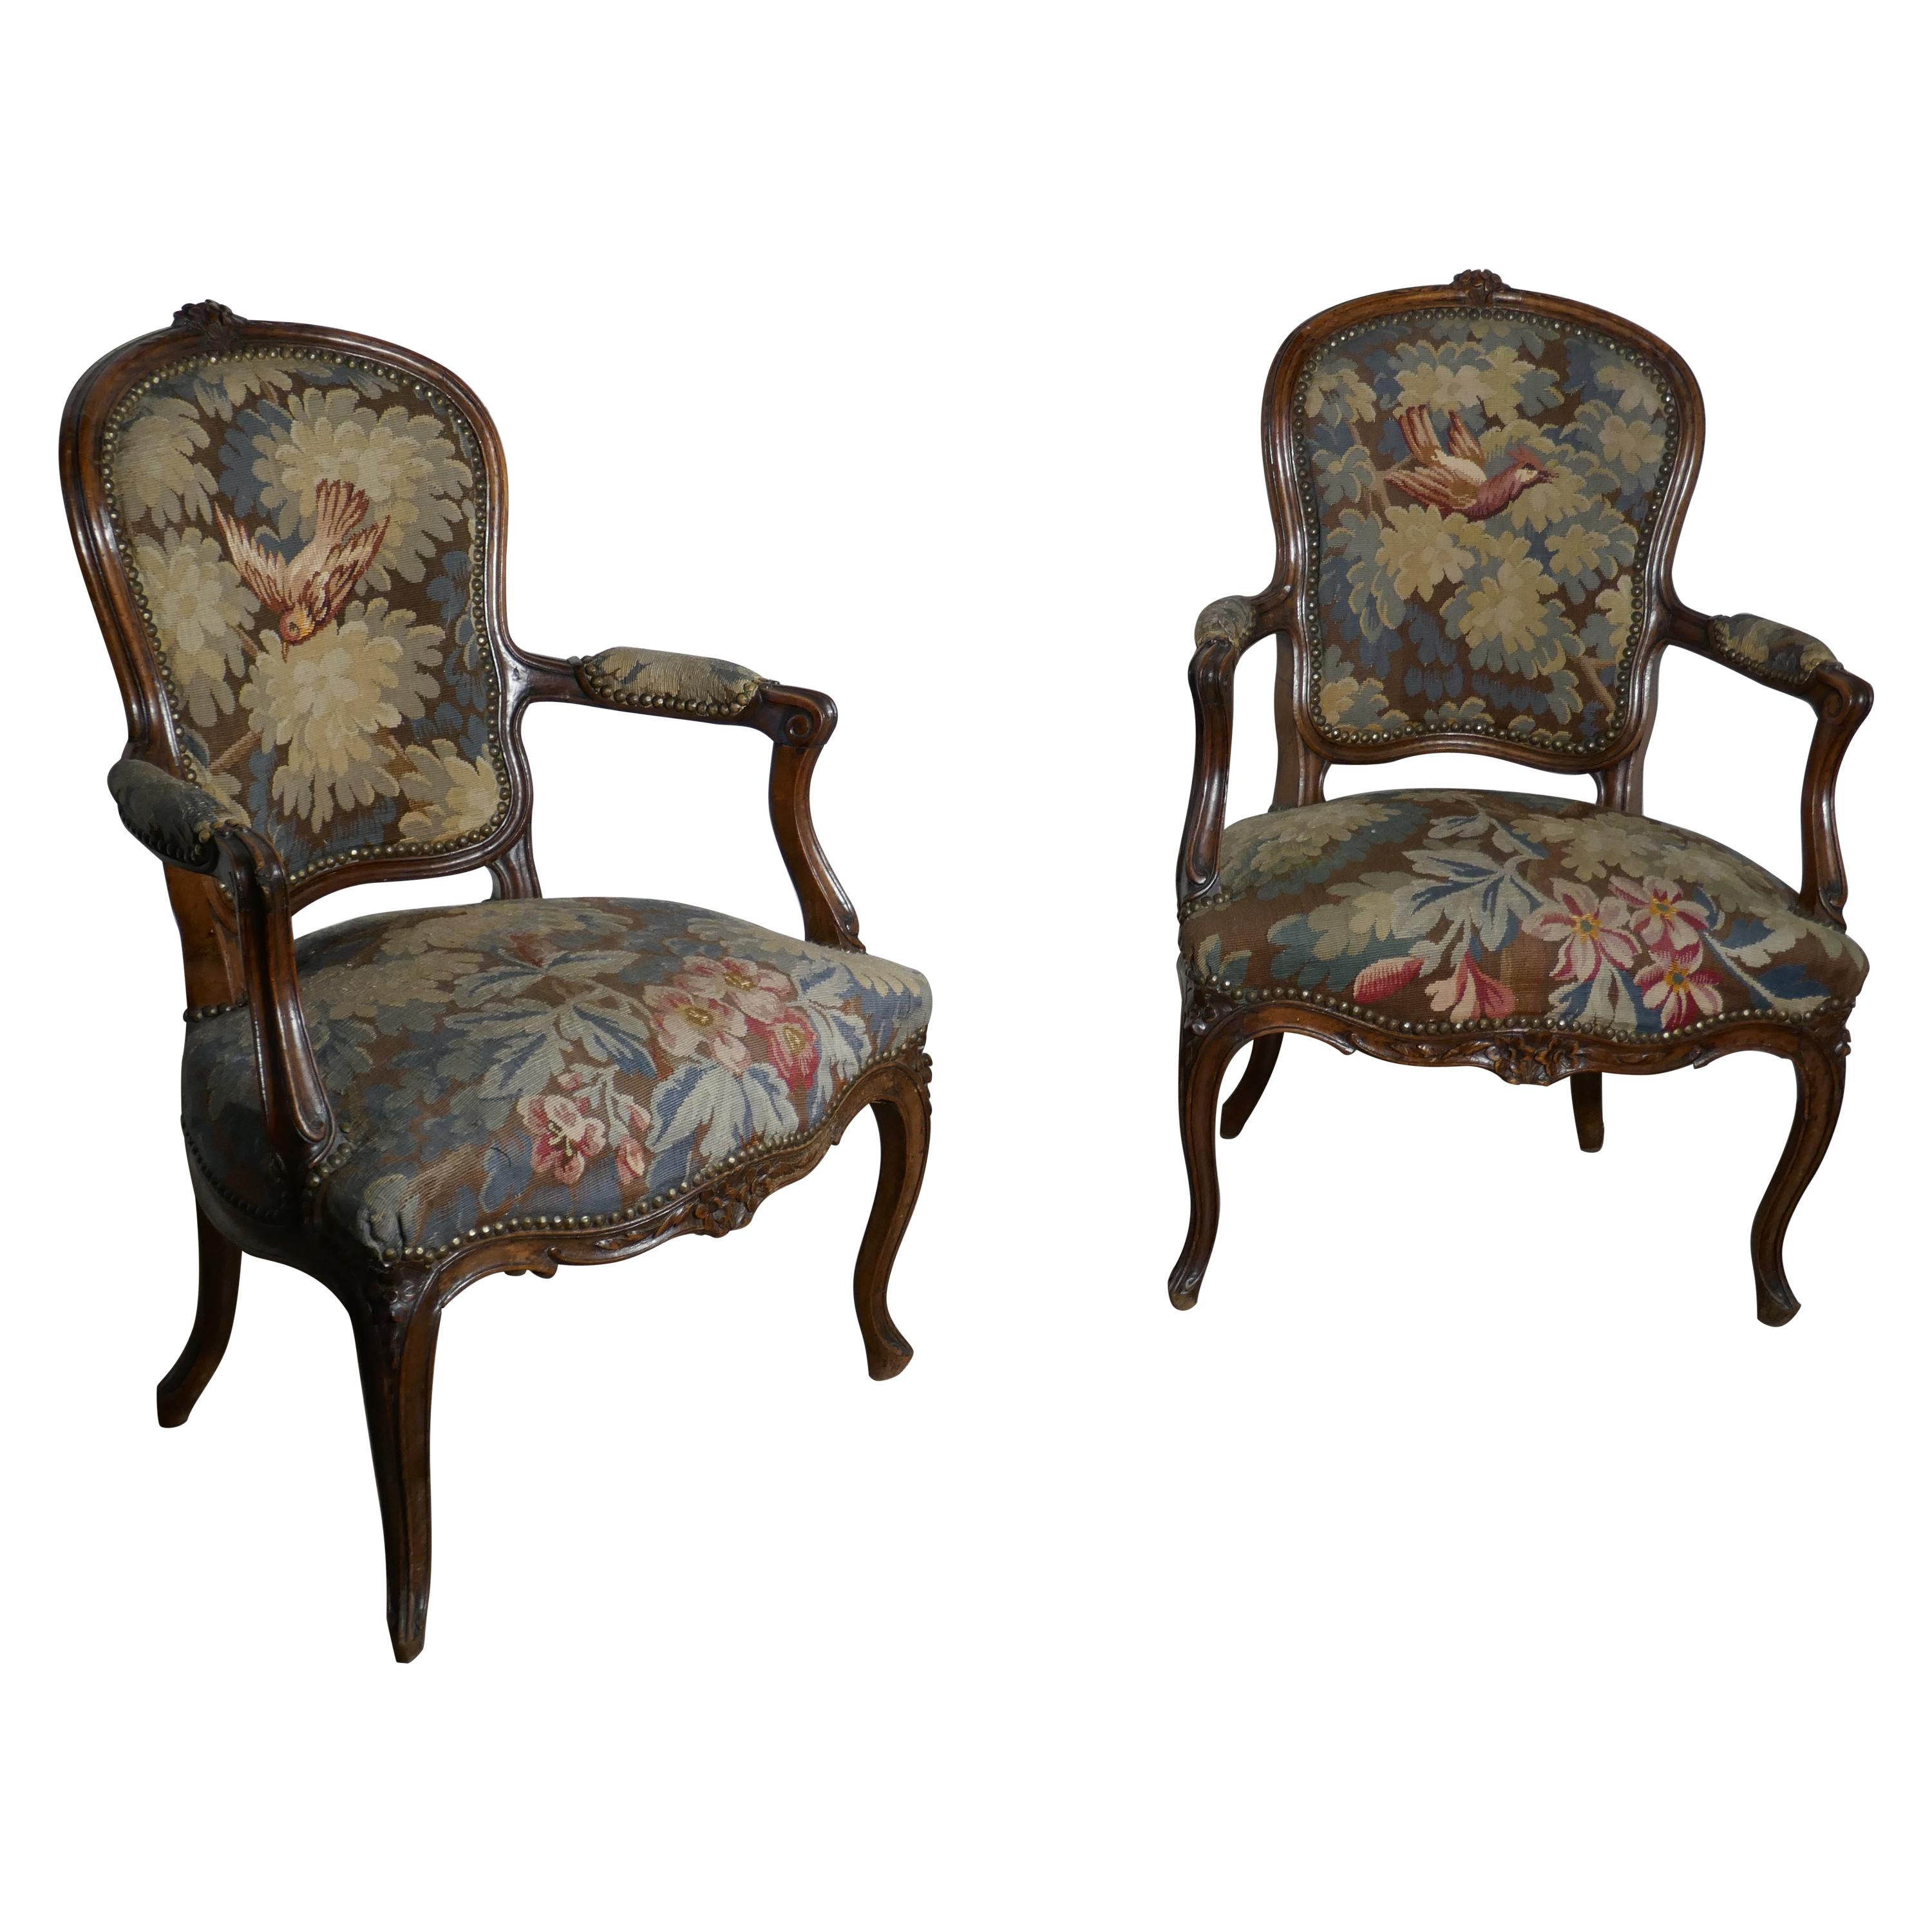 Pair of French Arts & Crafts Salon Library Chairs